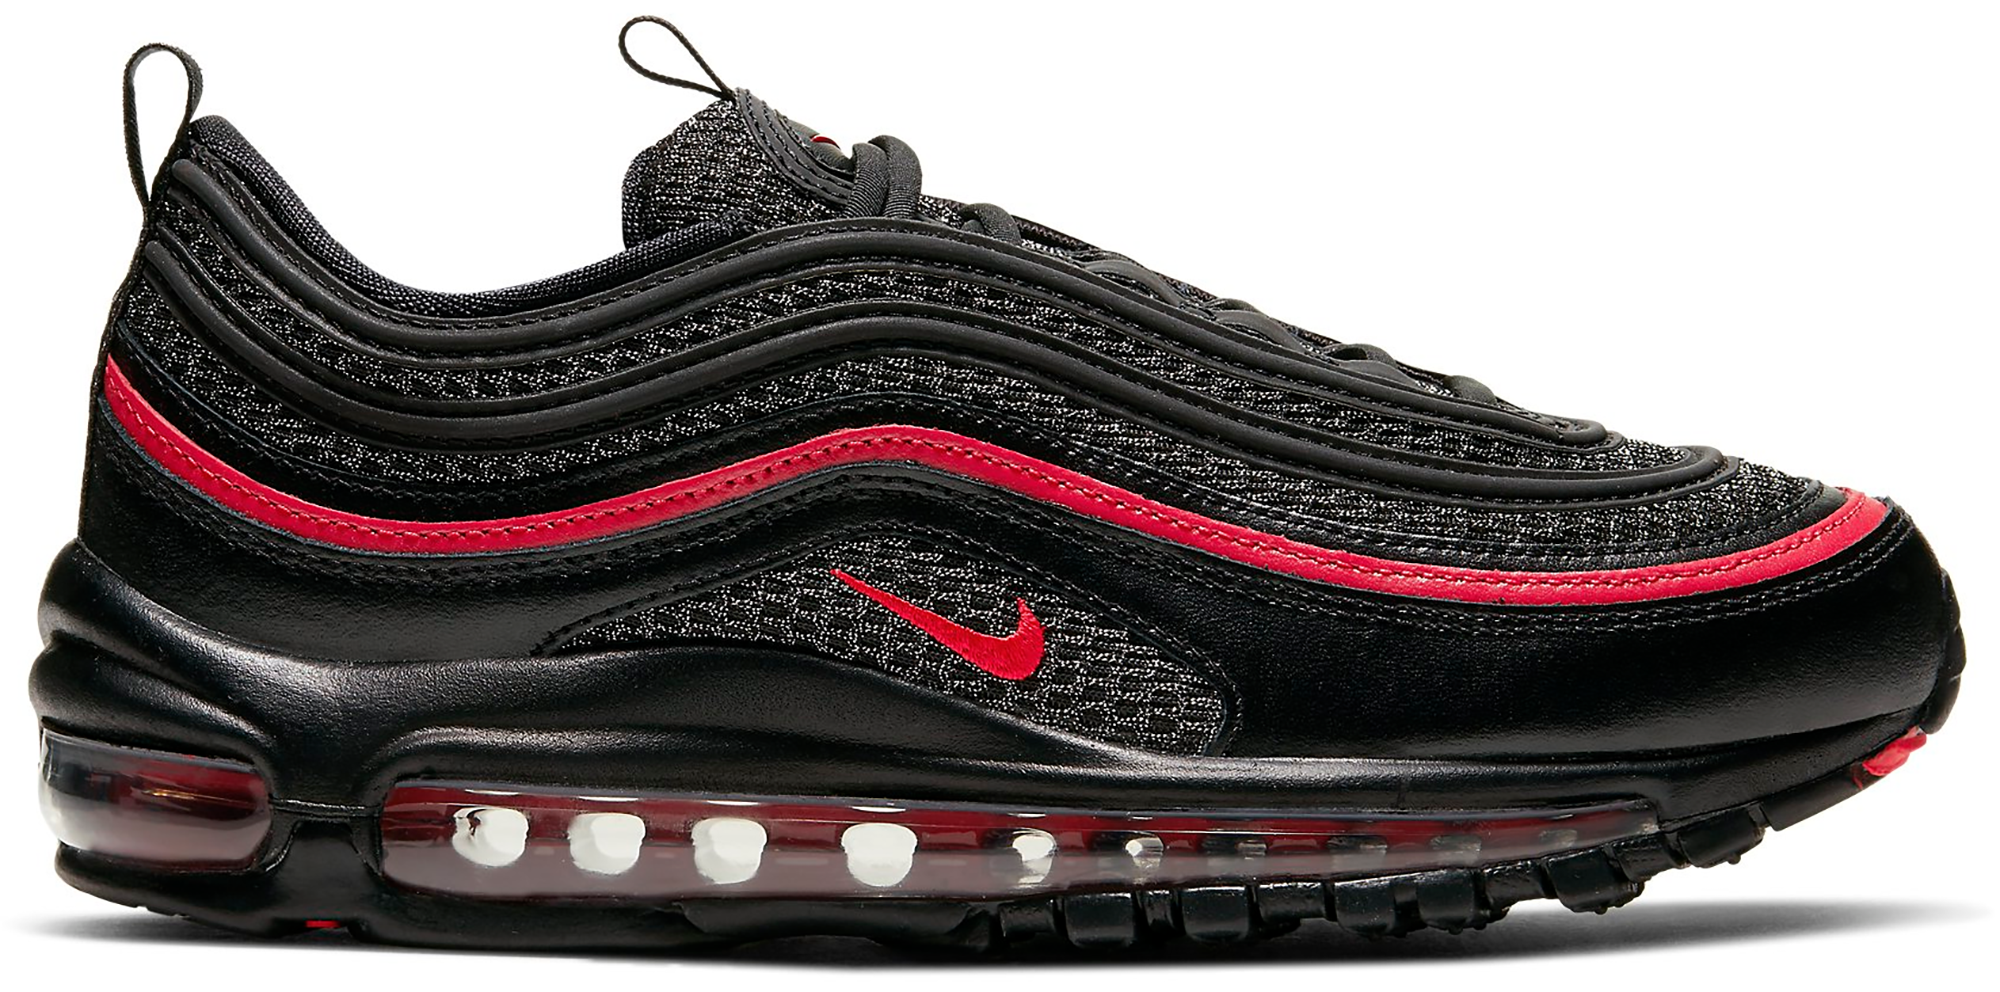 Nike Air Max 97 Valentines Day 2020 (W 